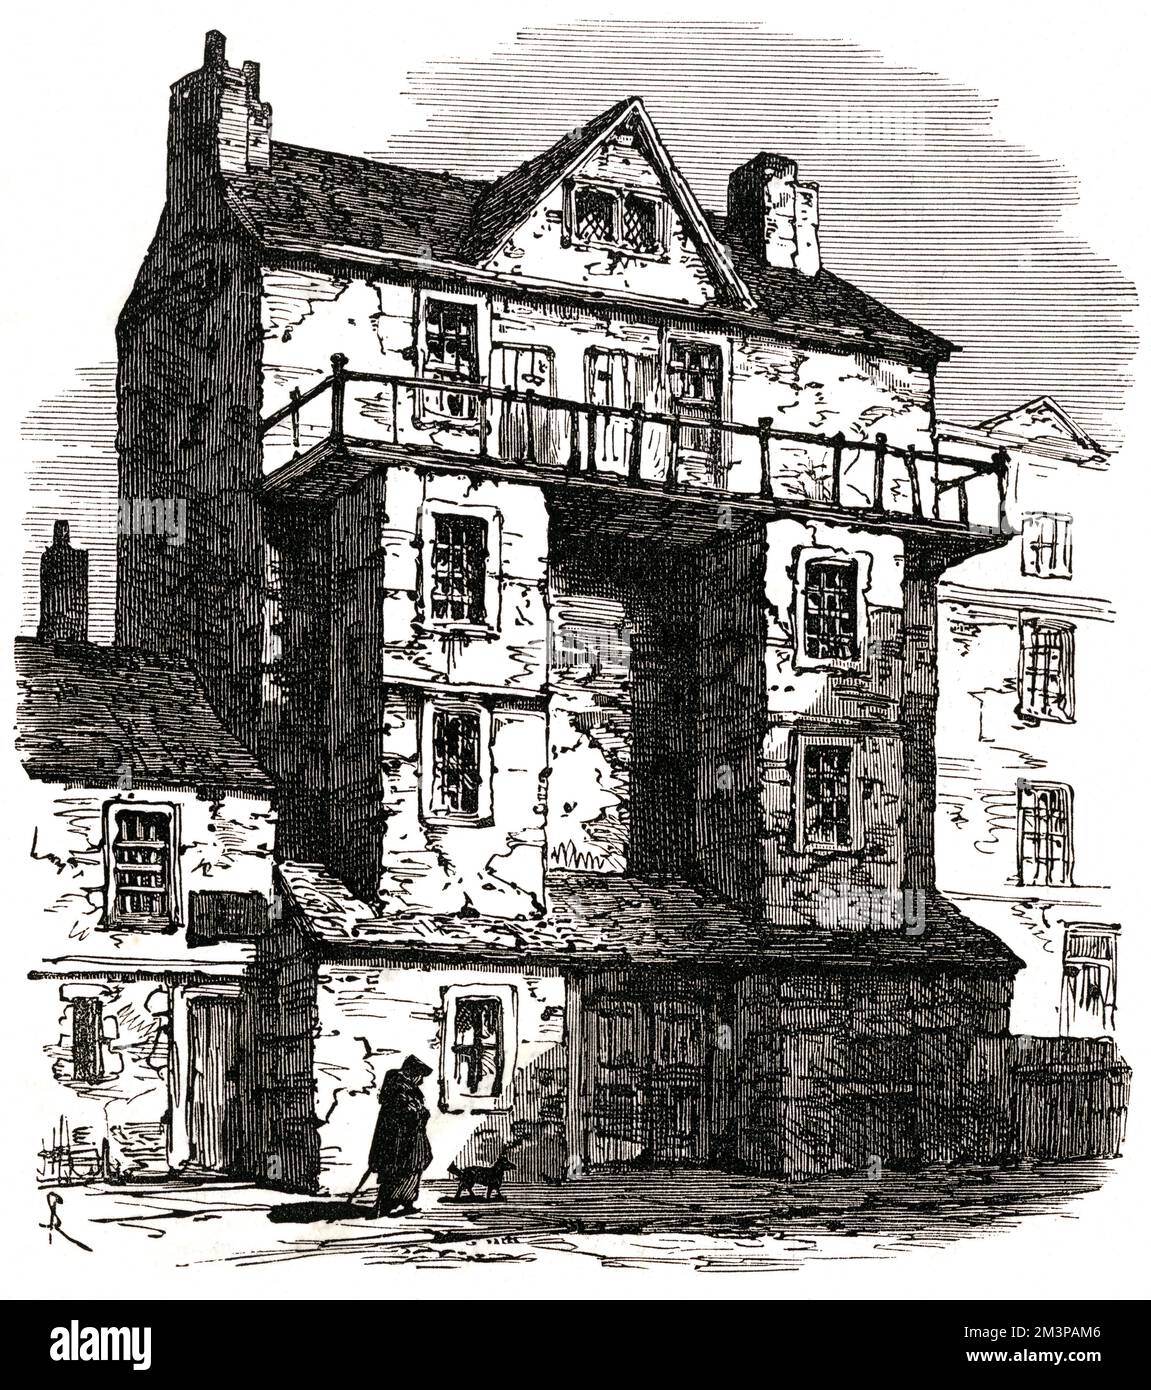 William Caxton's House nell'Almonry, Westminster. Data: 1877 Foto Stock